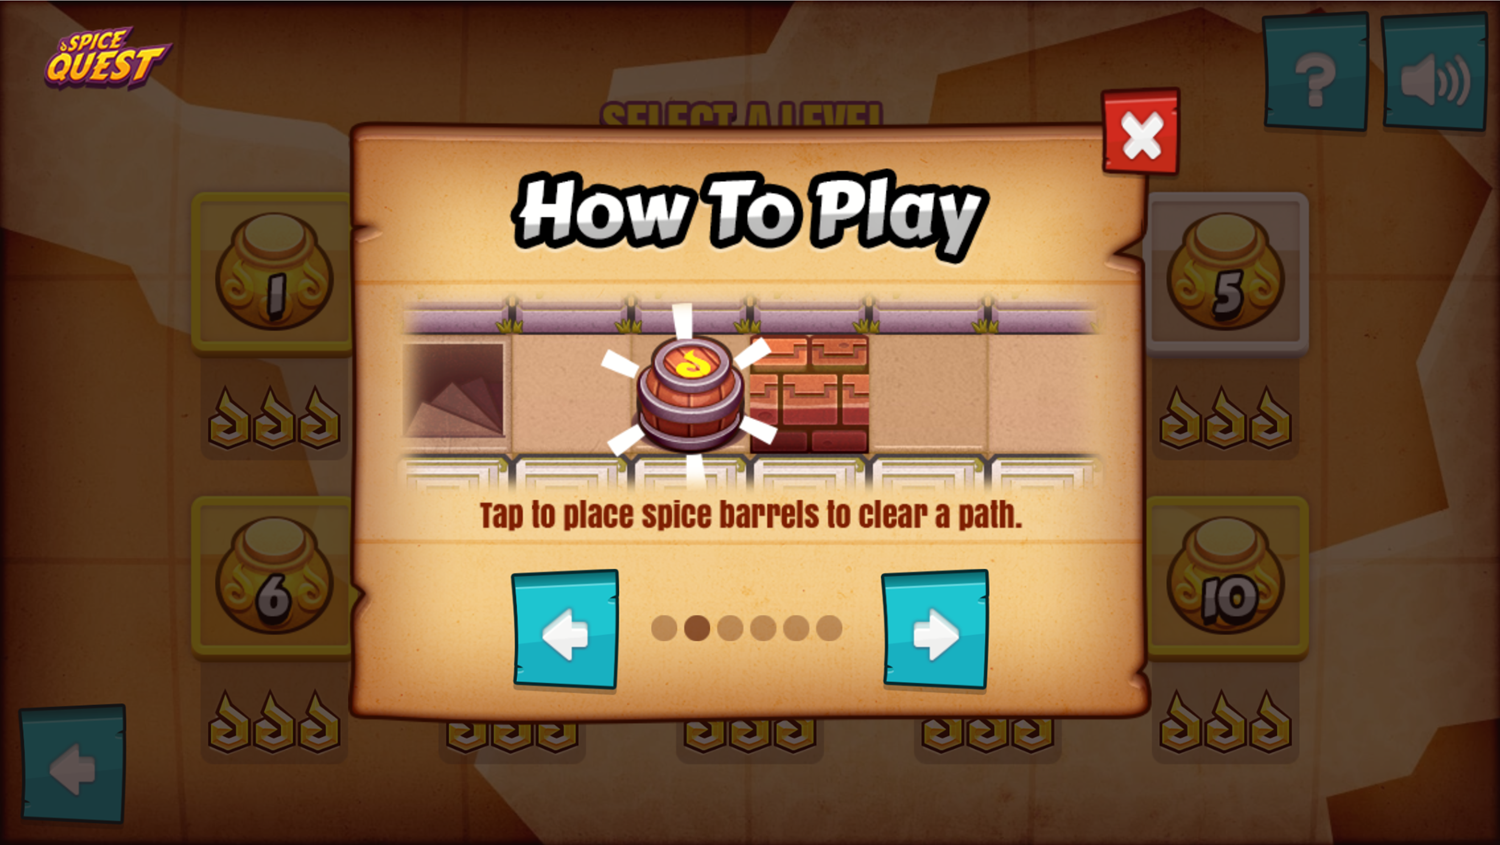 Spice Quest Game How to Play Screenshot.